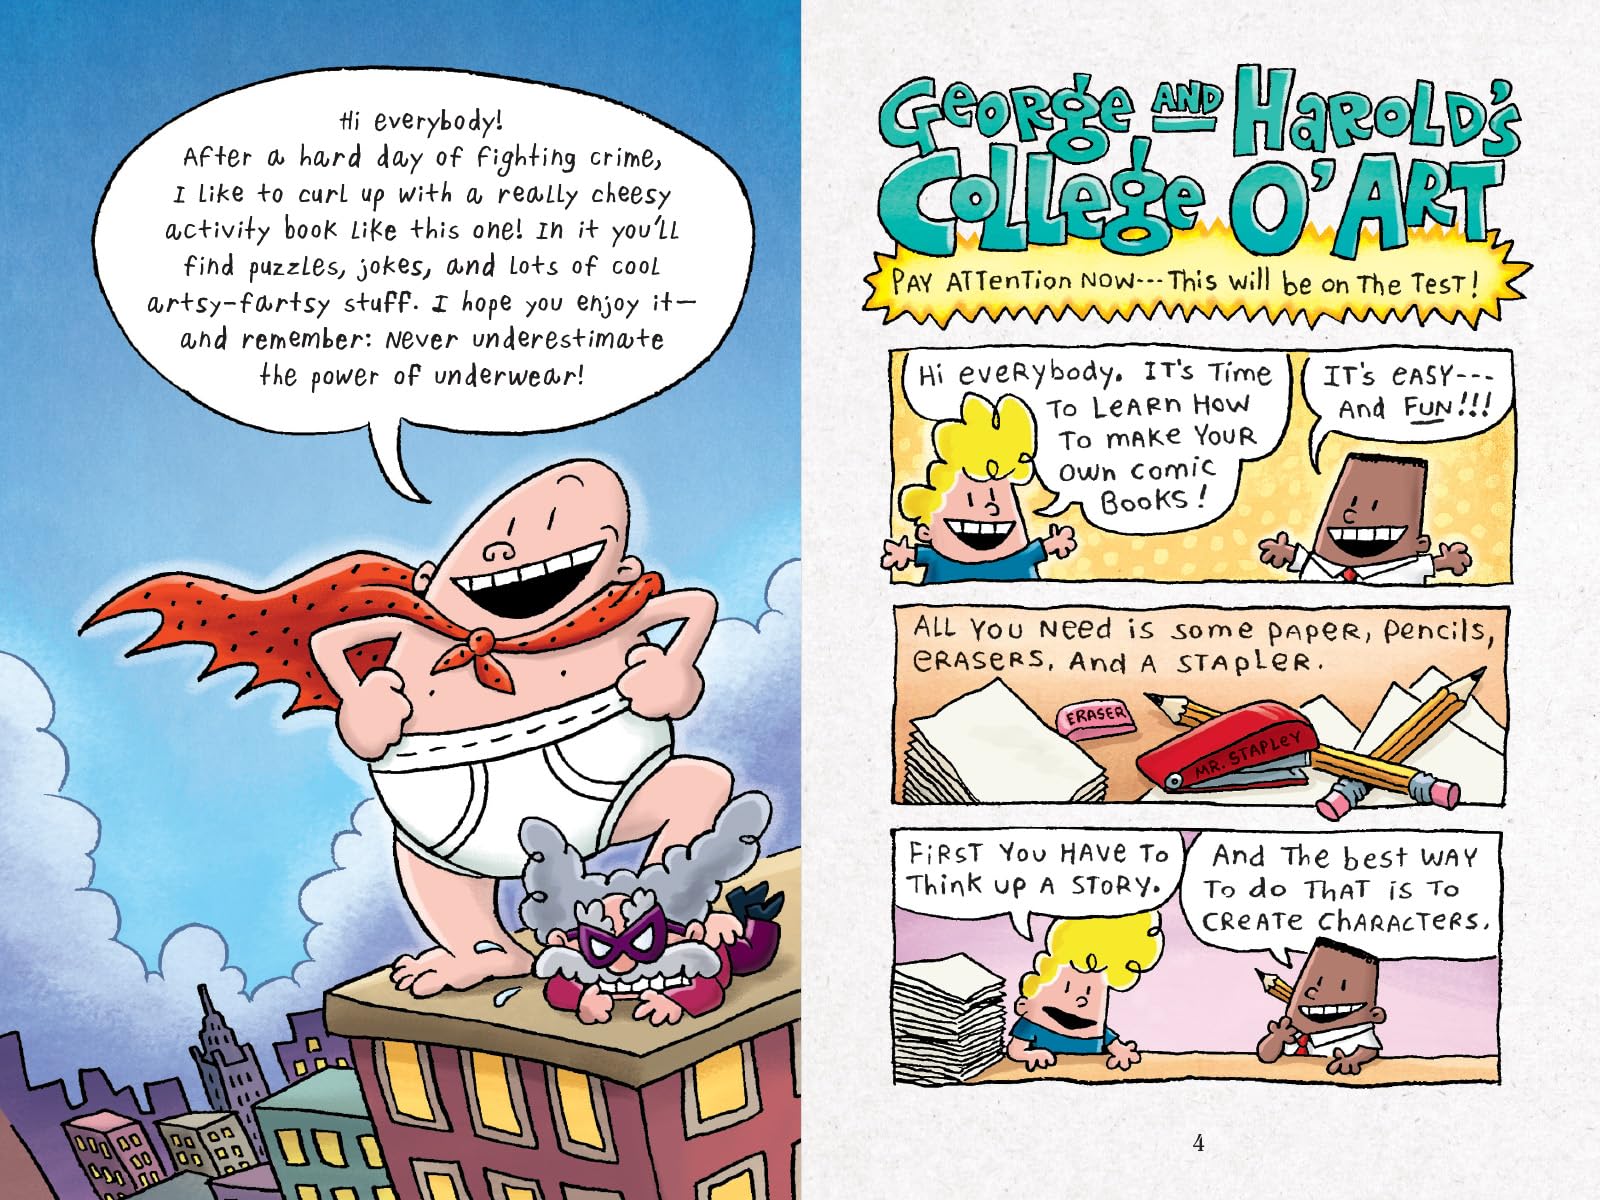 The Captain Underpants Double-Crunchy Book o' Fun: Color Edition (From the Creator of Dog Man)